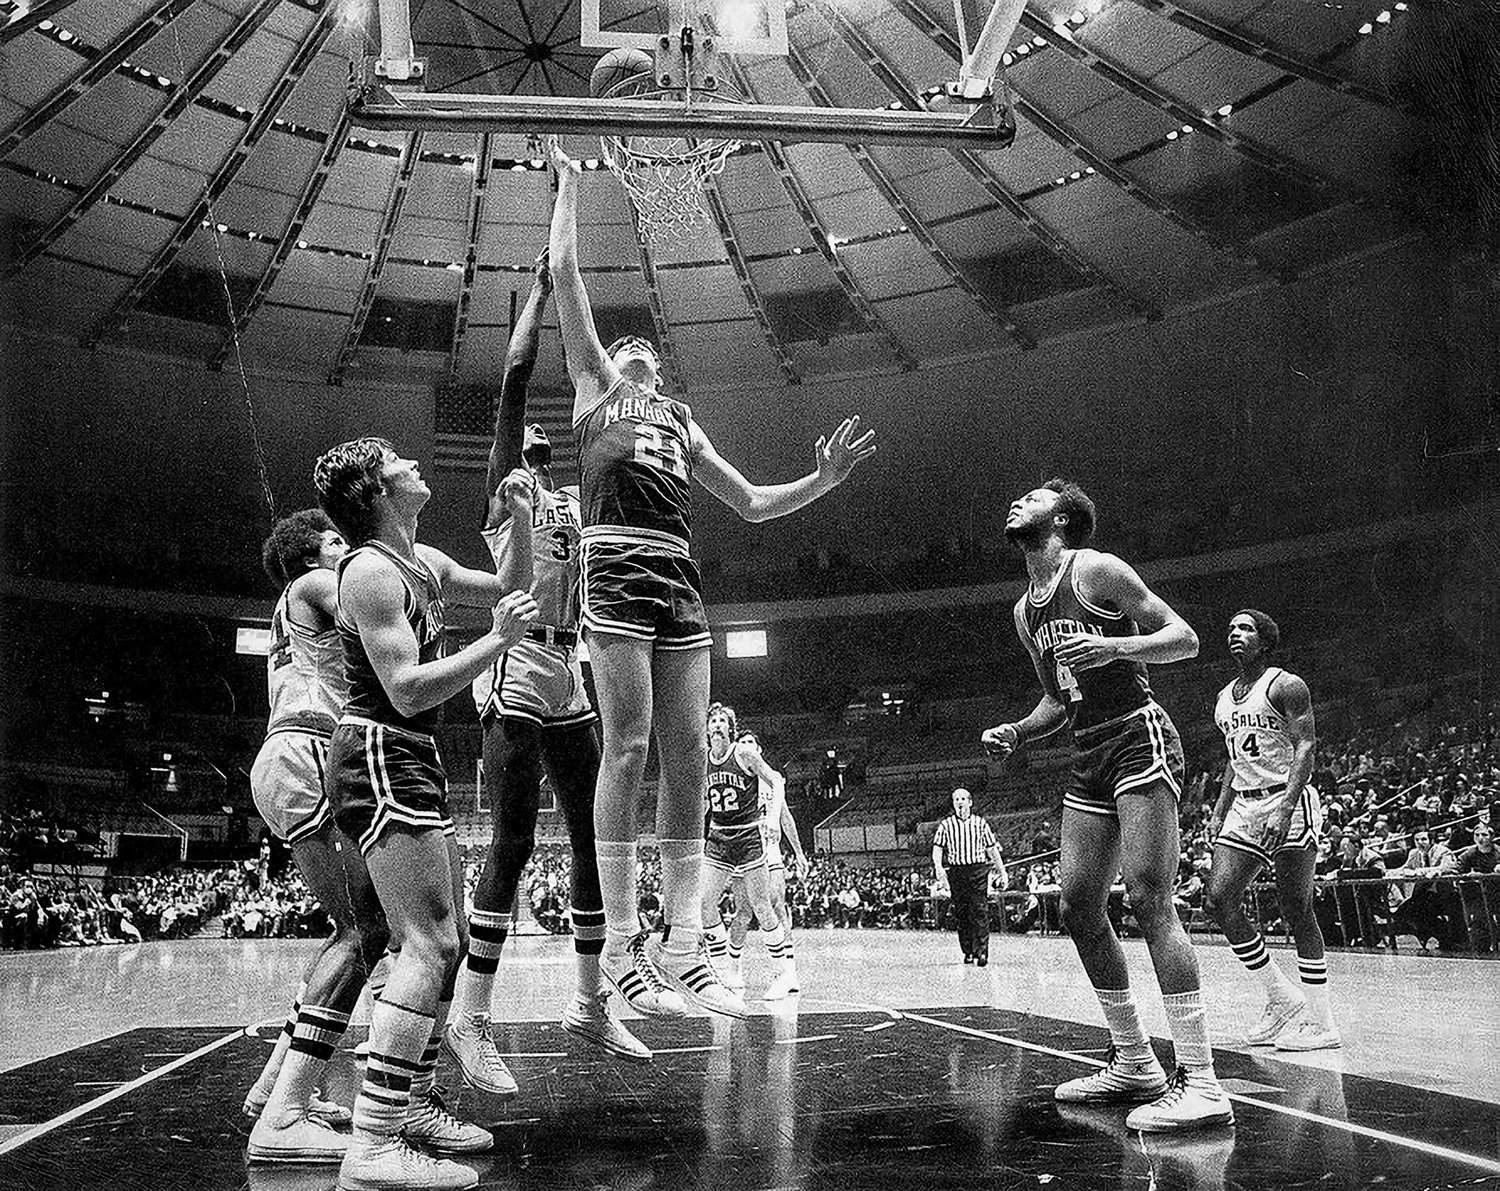 Manhattan played their home games at Madison Square Garden in the 1970s when Tom Lockhart and Bill Campion were on the team. Now, they are teaming up again to support the Bronx Basketball Hall of Fame.